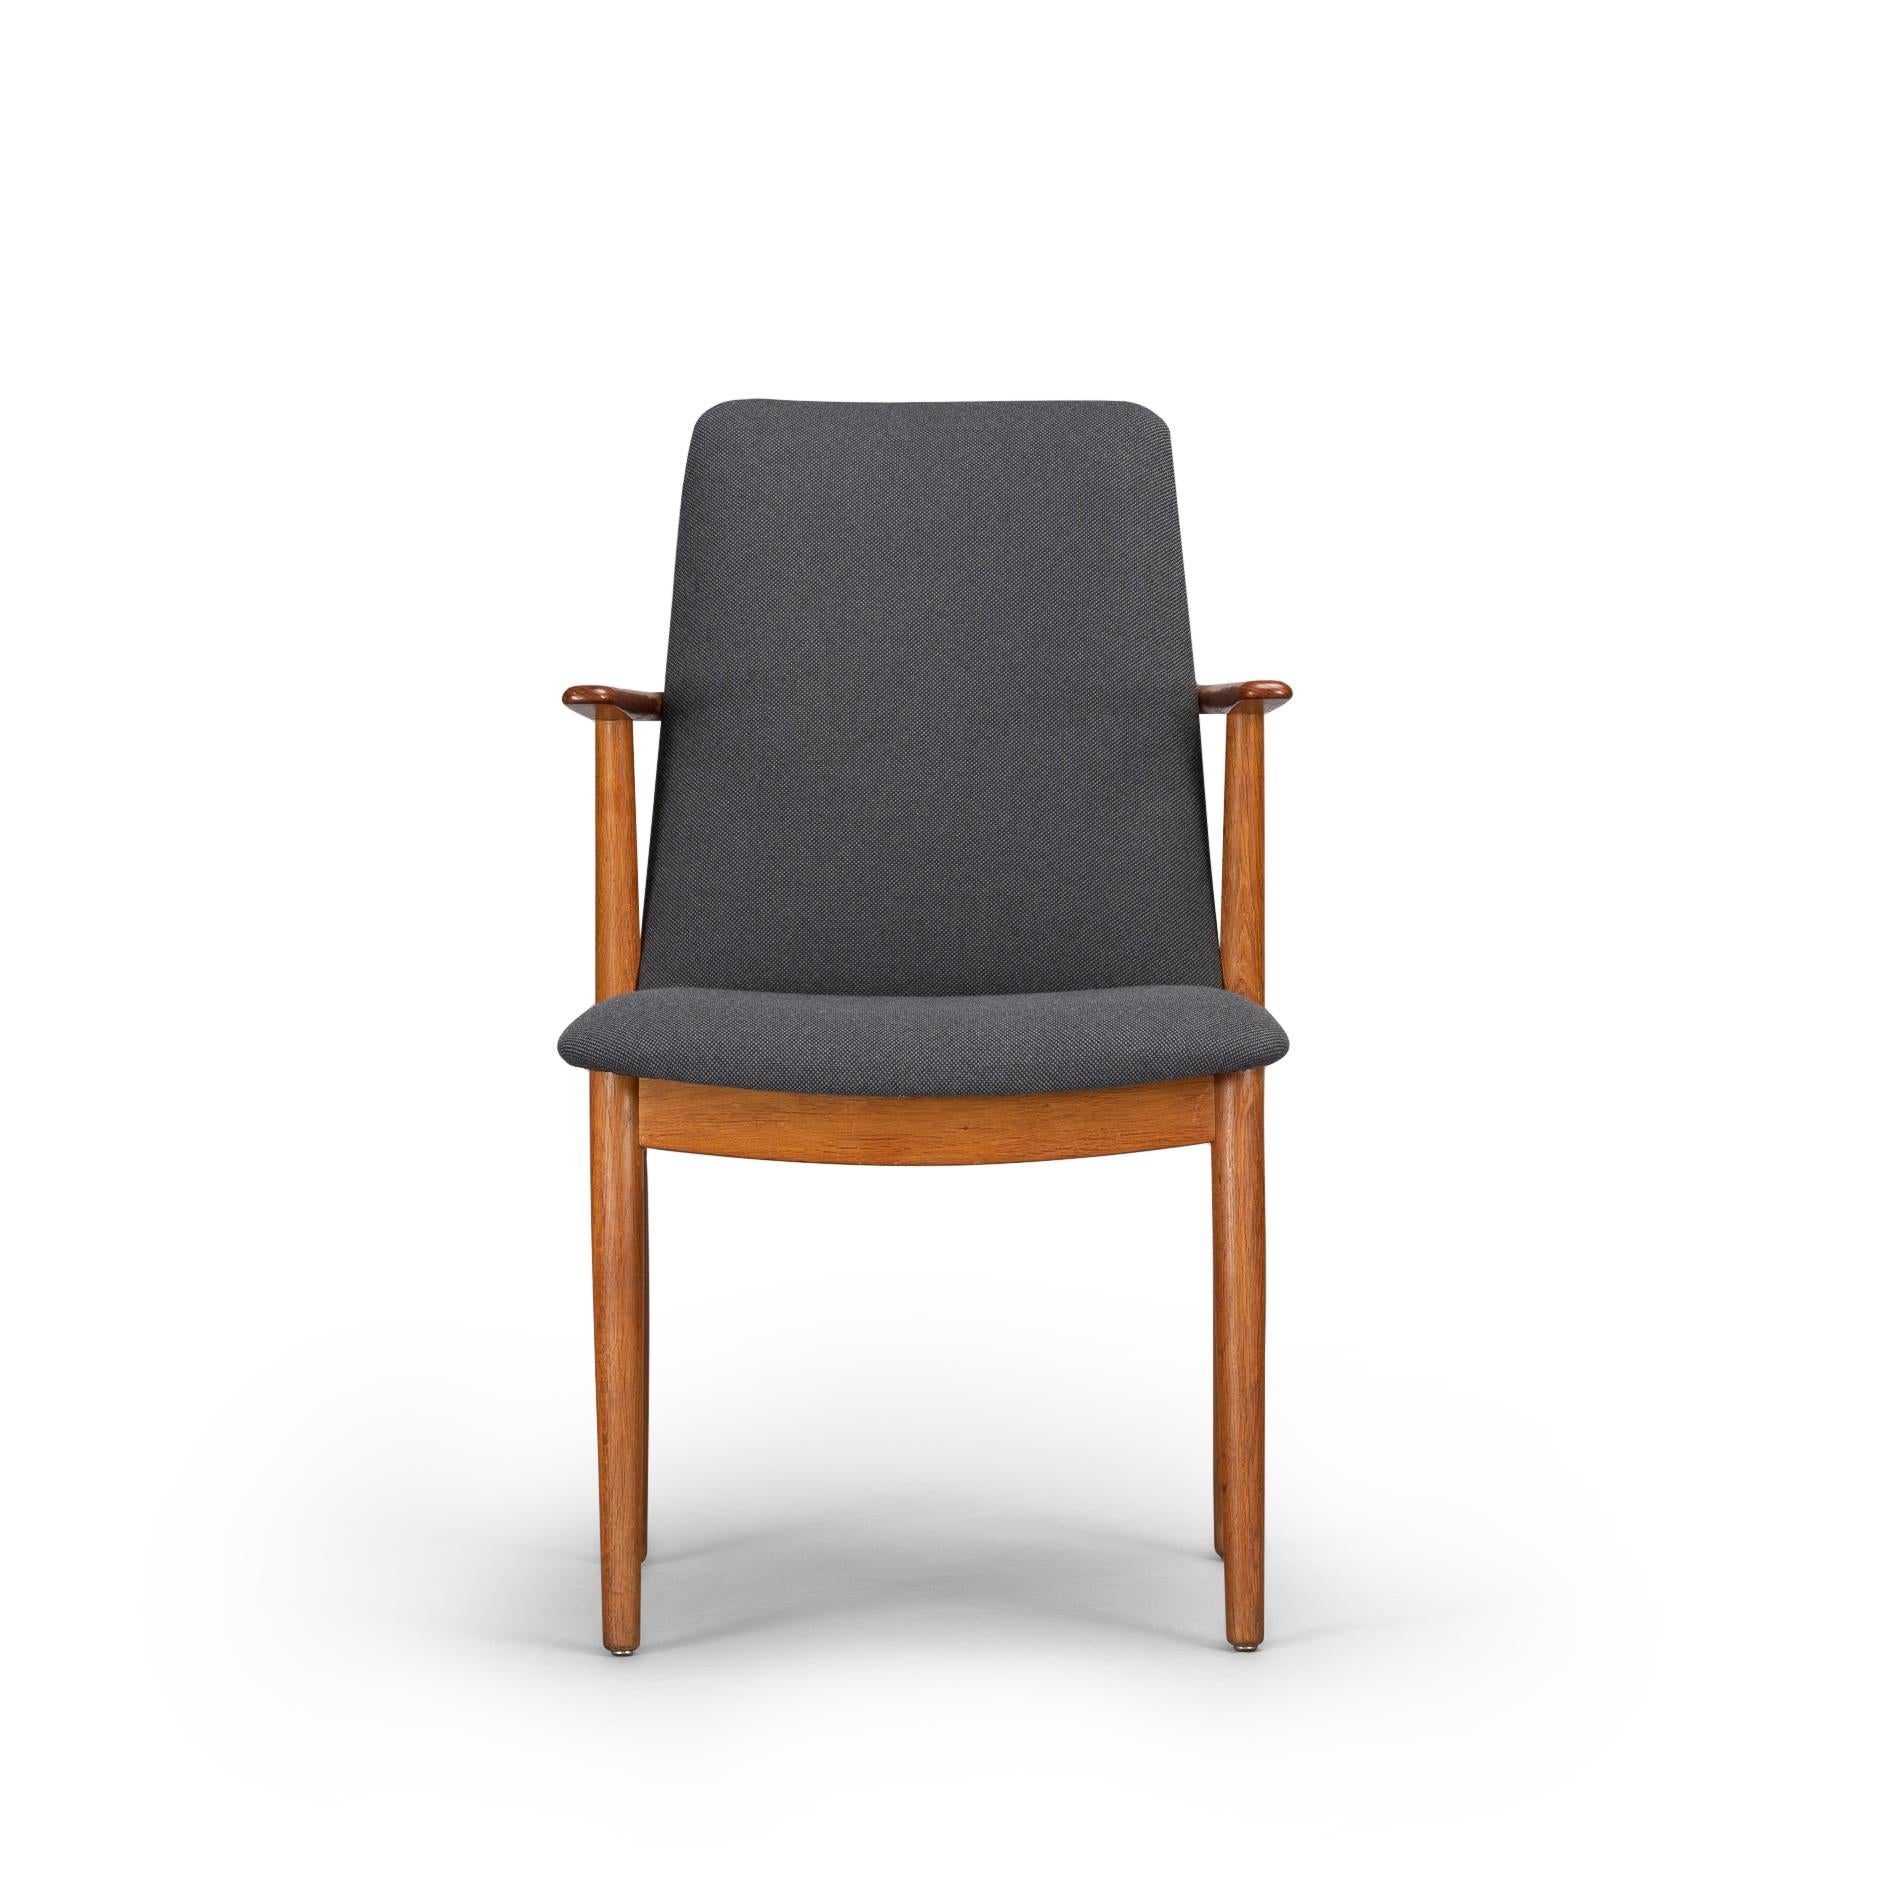 A very straight up aesthetic design by Hans Olsen from the late 60s two armed chair. The chair has been reupholstered in grey colour Ploegwool fabric. This desk chair is designed by Hans Olsen for Hillerød Møbler. The legs and arms are made of solid